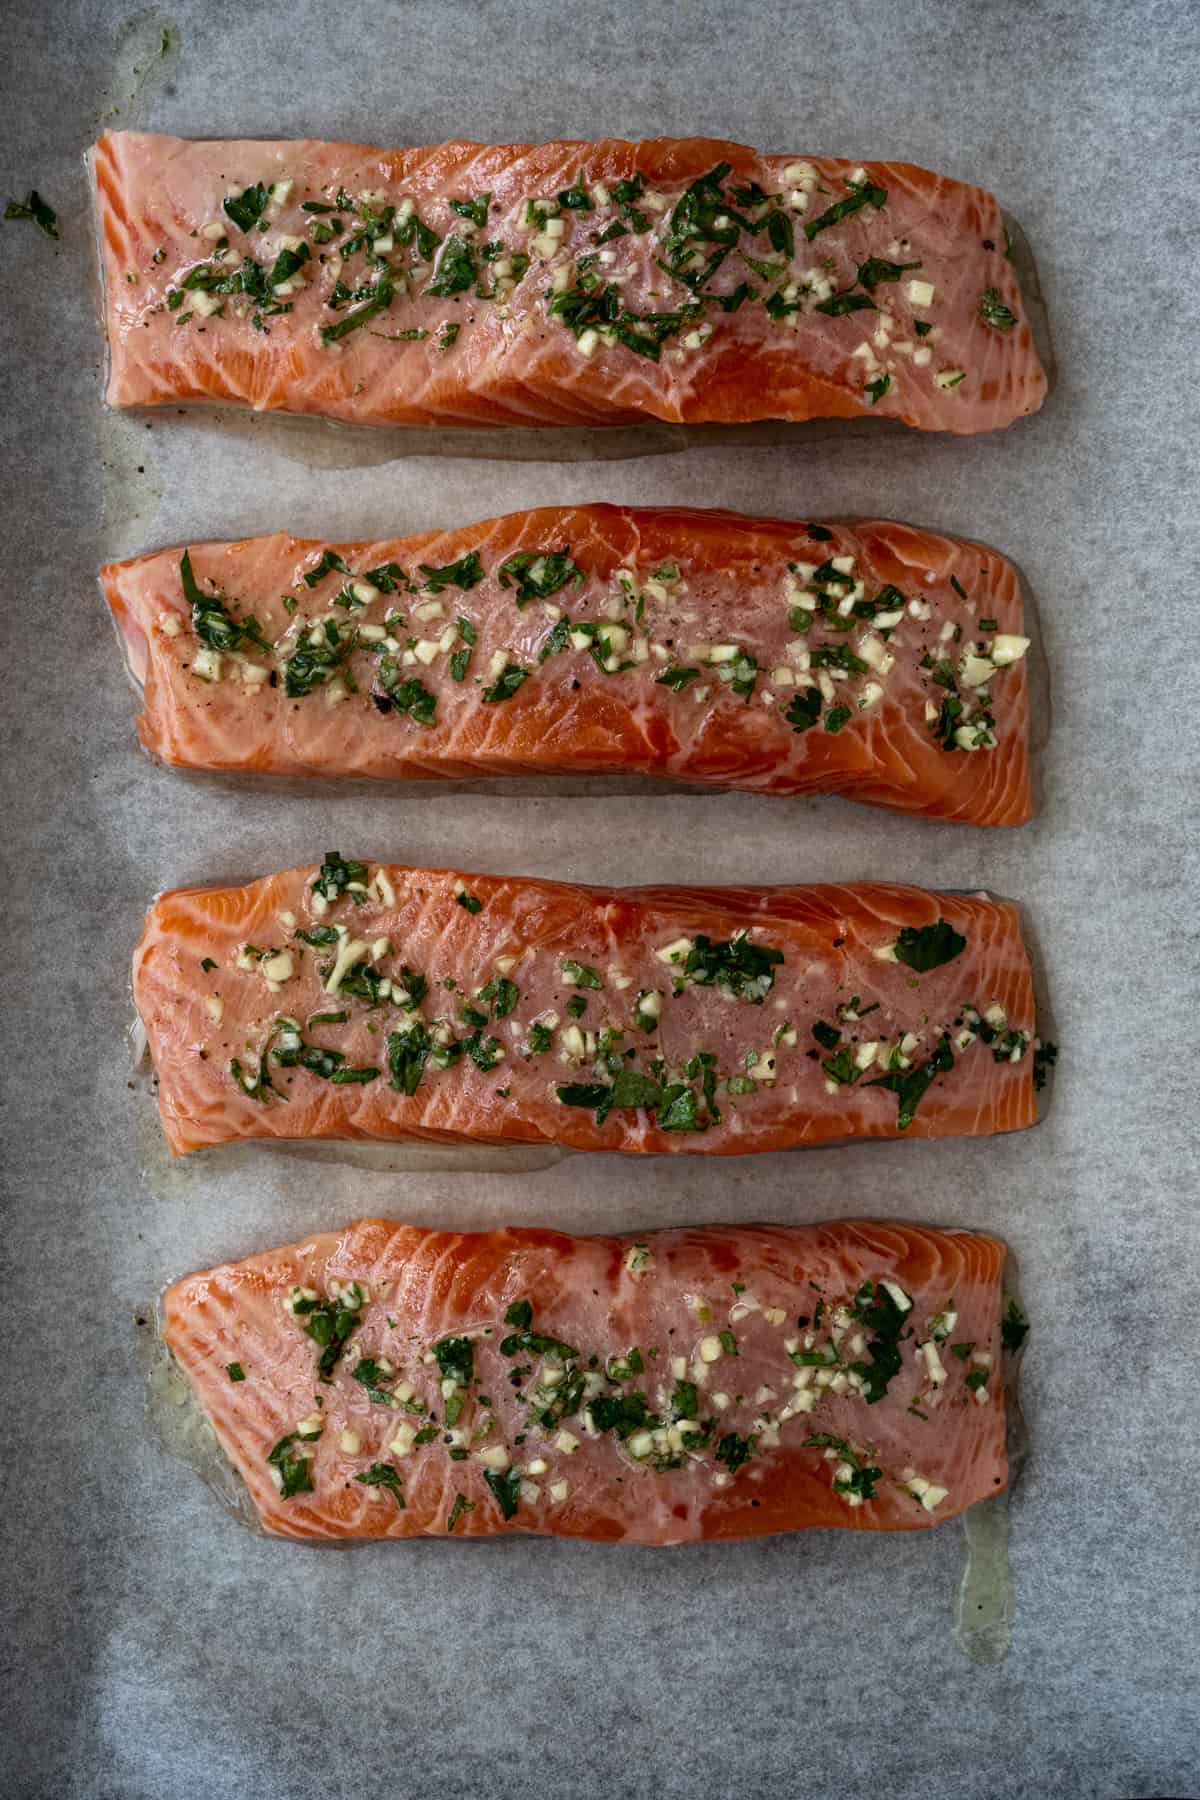 Four filets of raw salmon topped with lemon garlic herb on parchment lined bake tray.